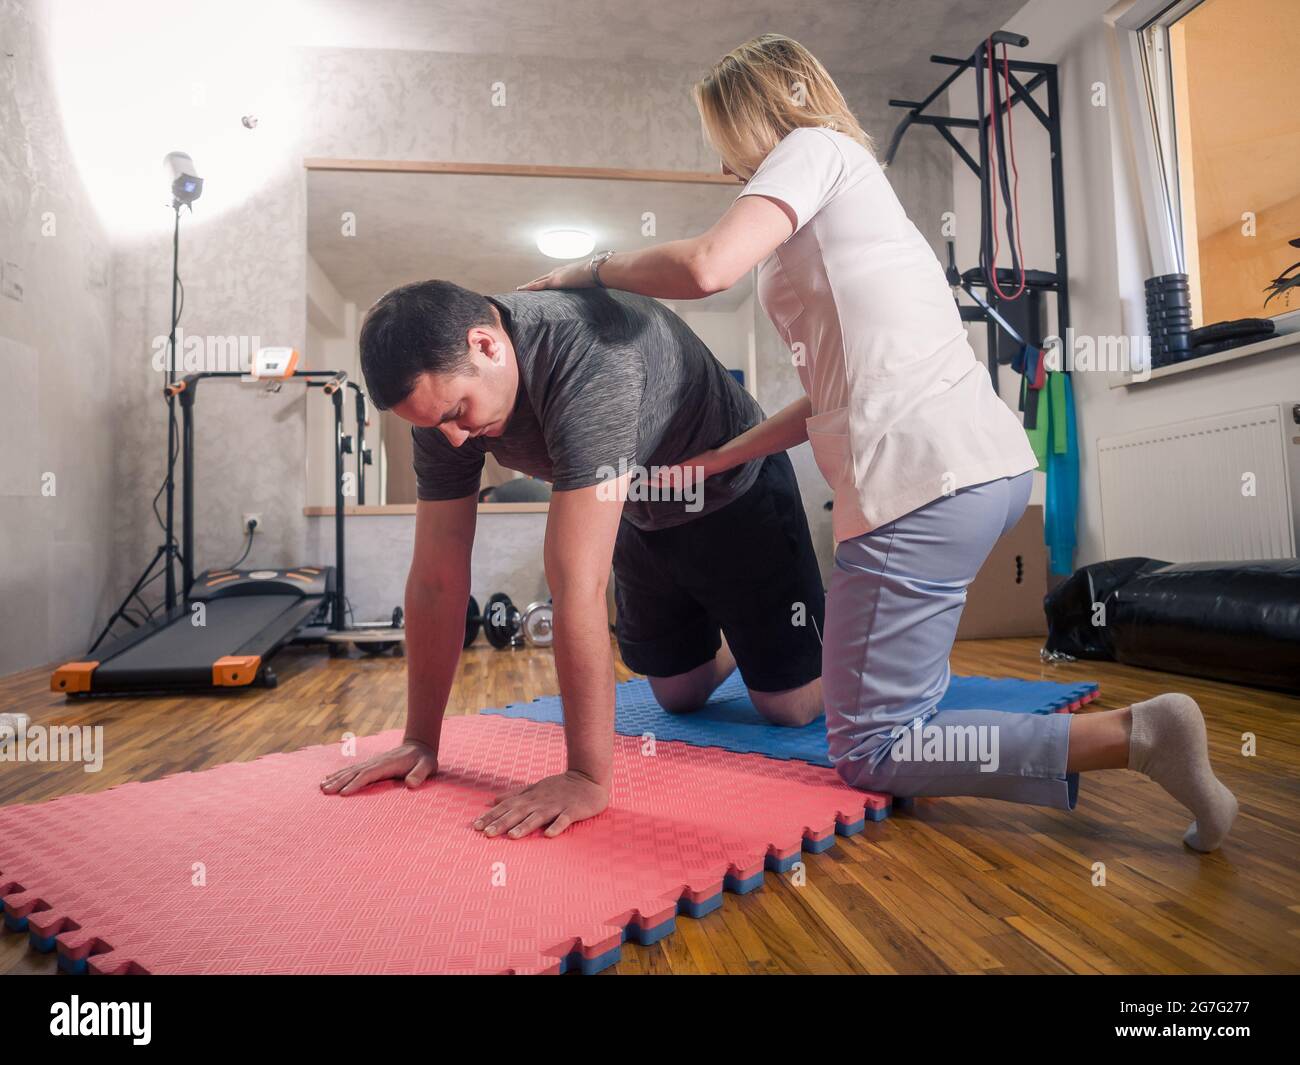 Physiotherapy indoors in a room. One young adult man exercising abdominal and working out with young woman therapist. Stock Photo